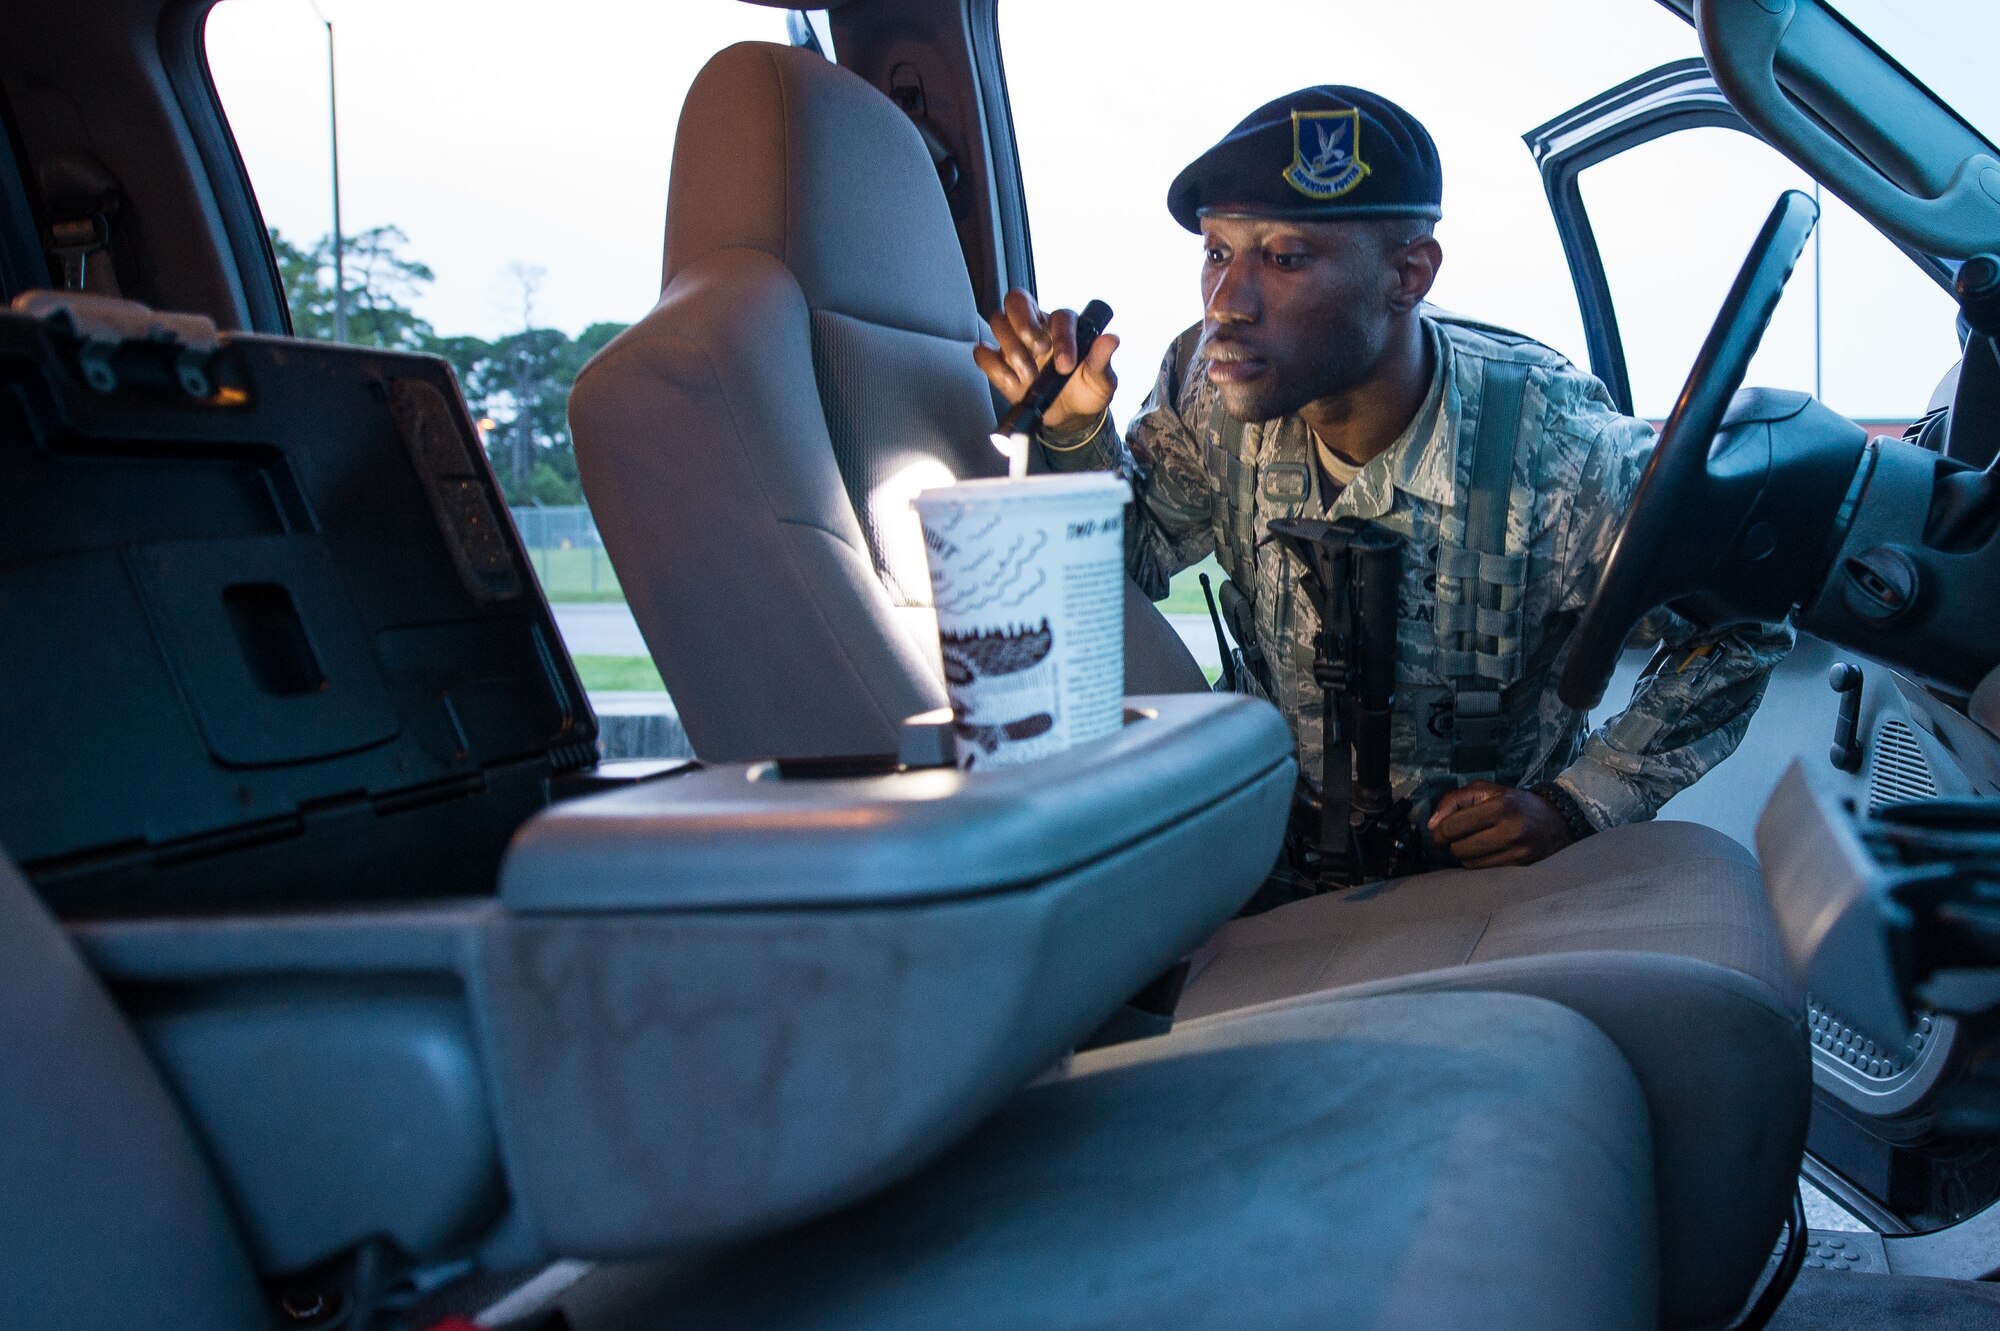 U.S. Air Force Senior Airman Bryson Polhill, 116th Security Forces Squadron, Georgia Air National Guard, searches a simulated suspicious vehicle for drugs during a training exercise at Joint Base Savannah, Ga., June 24, 2015. The JSTARS cops from the Georgia Air National Guard’s 116th Air Control Wing completed 15 days of law enforcement and flightline security training during their annual tour at Joint Base Savannah. During the training, the security forces Airmen responded to multiple simulated security threats each day and played the role of both cops and aggressors under the watchful eye of evaluators from the unit. (U.S. Air National Guard photo by Senior Master Sgt. Roger Parsons/Released)